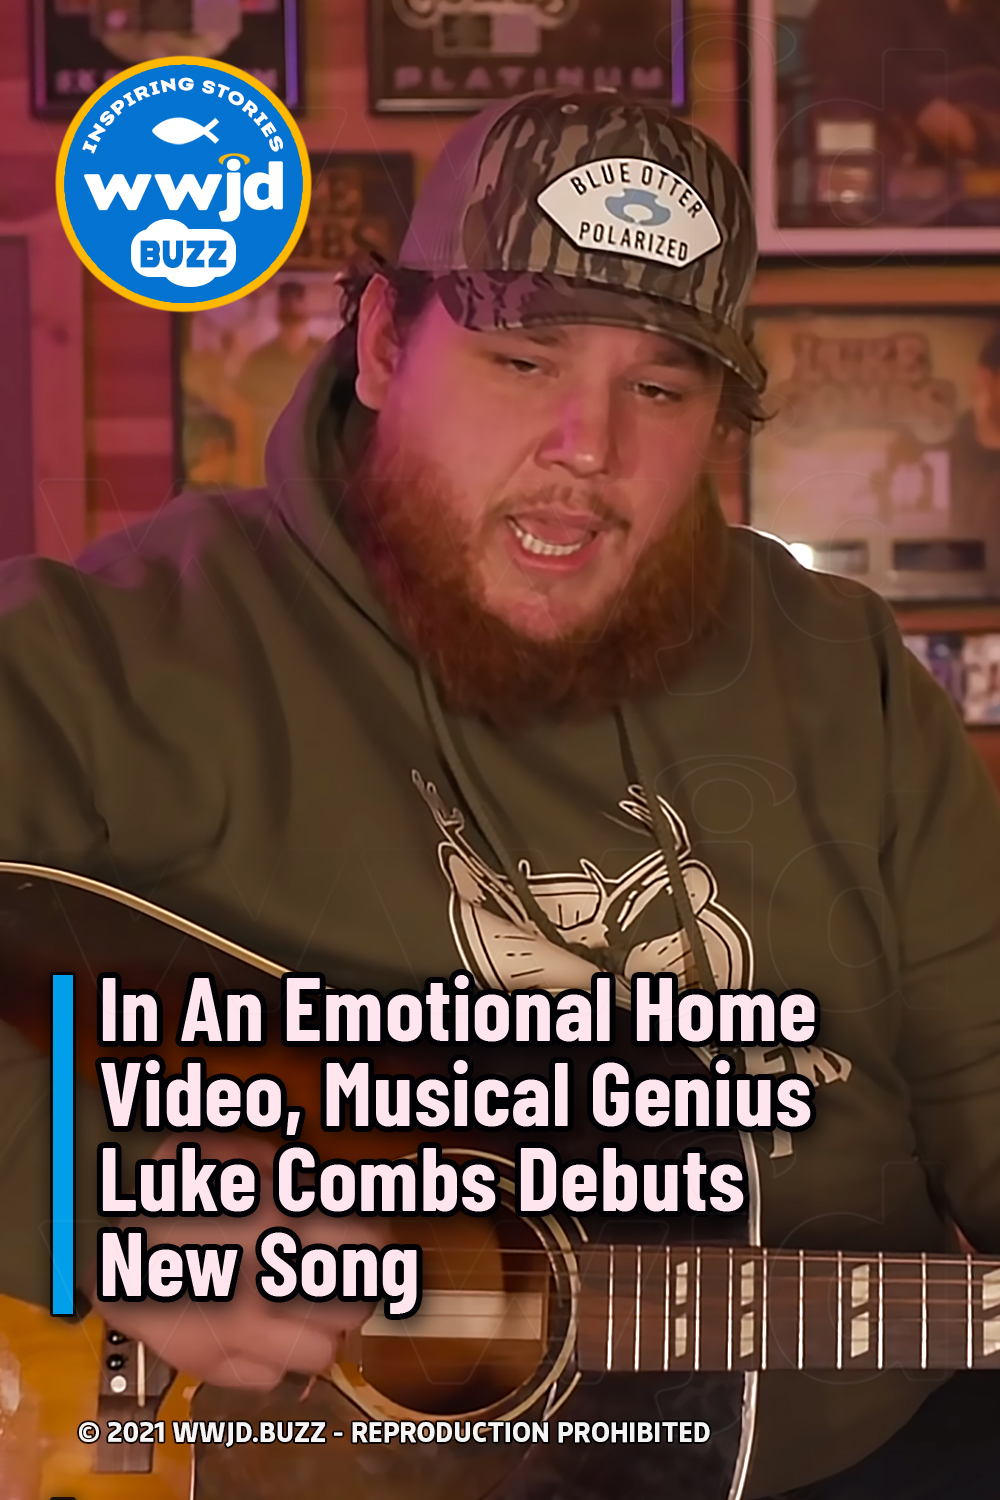 In An Emotional Home Video, Musical Genius Luke Combs Debuts New Song